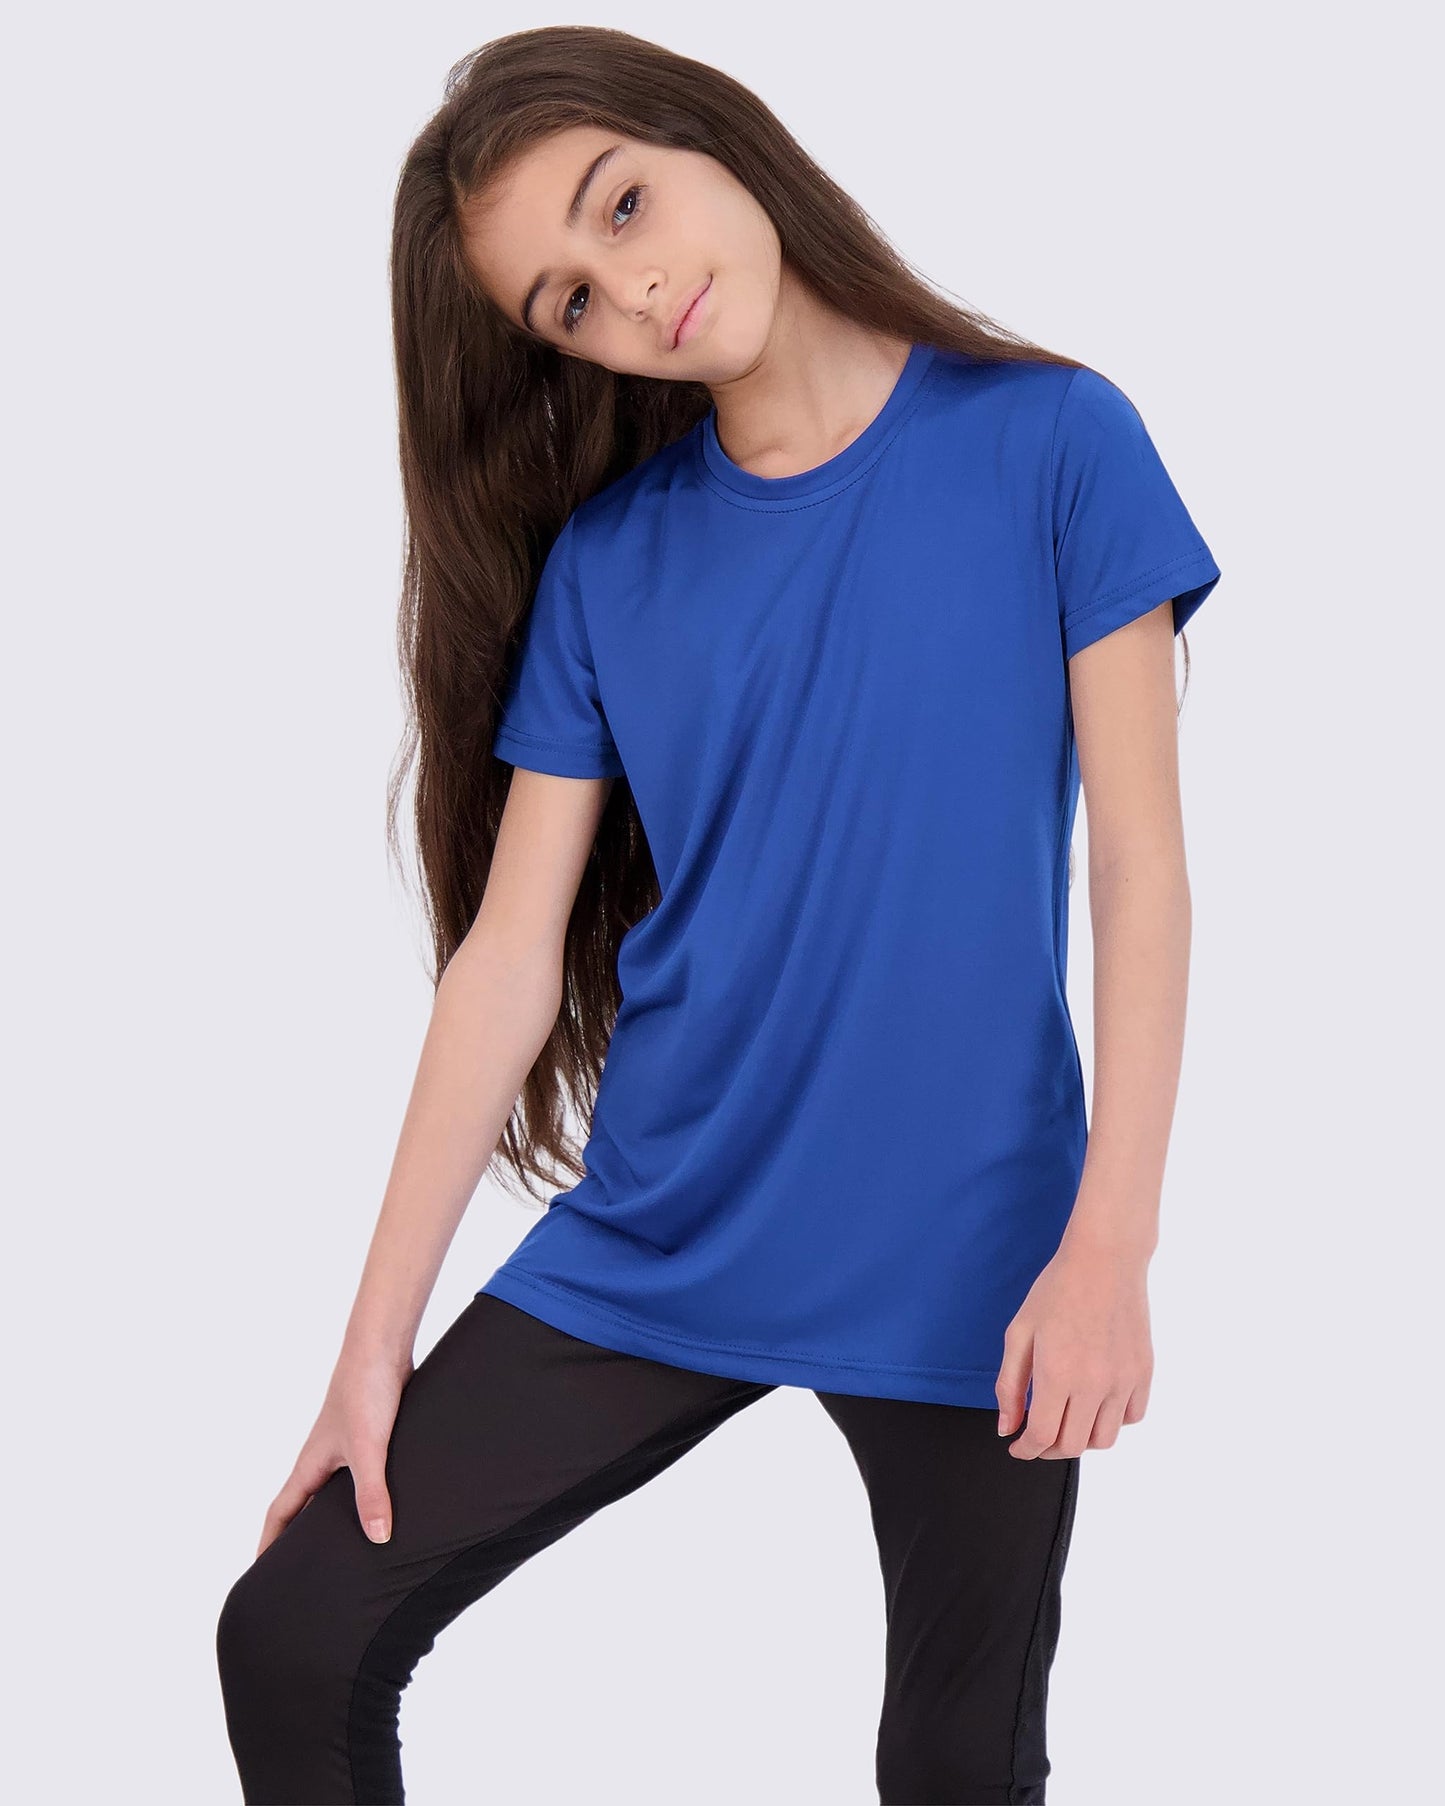 Real Essentials 4 Pack: Girls Short Sleeve Dry-Fit Crew Neck Active Athletic Performance T-Shirt